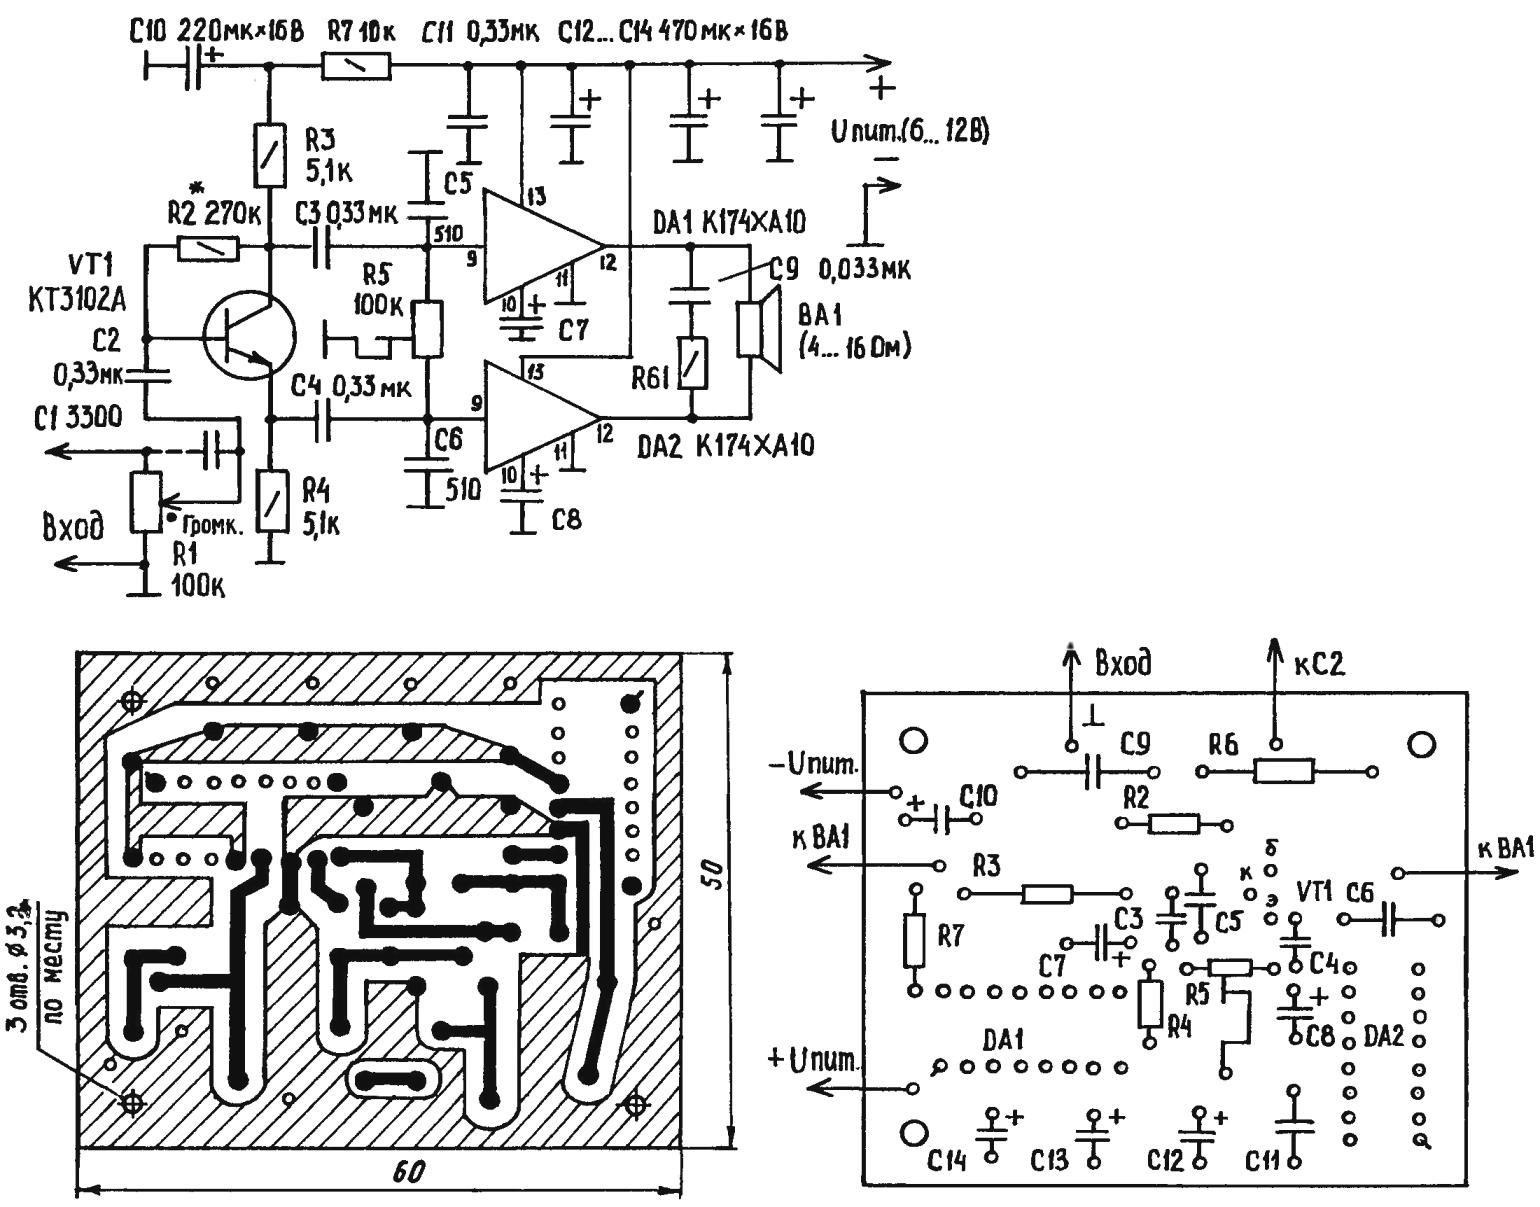 A circuit diagram of a simple and reliable power amplifier audio frequency transistor phase shifter, PCB and symbol mounted on her radio